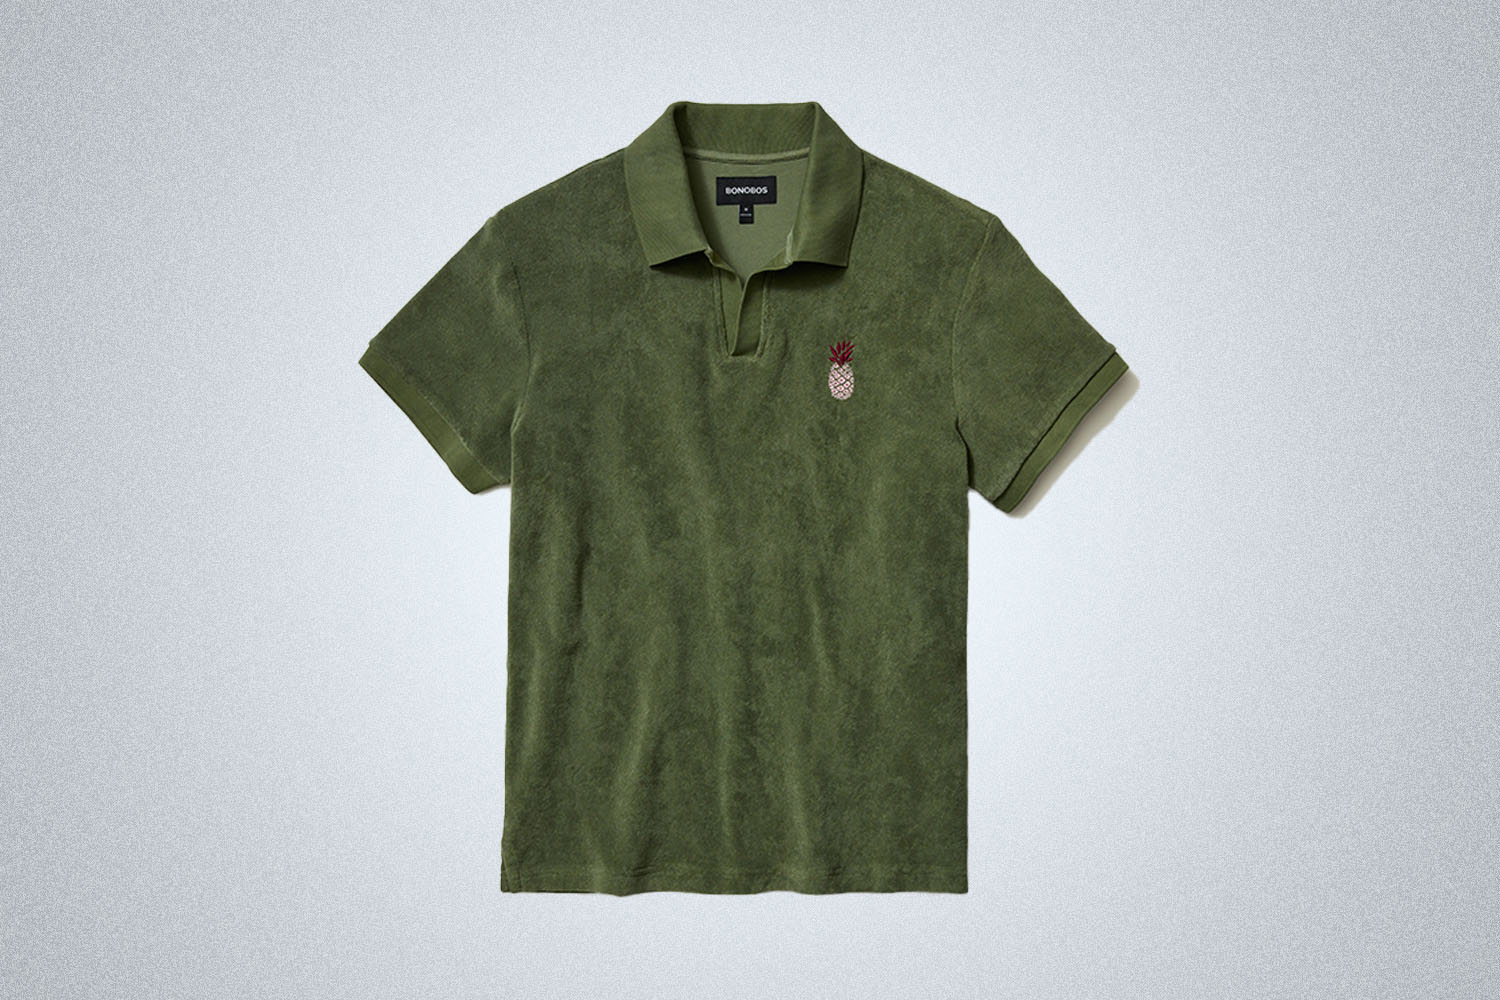 a green terry polo from Bonobos on a grey background